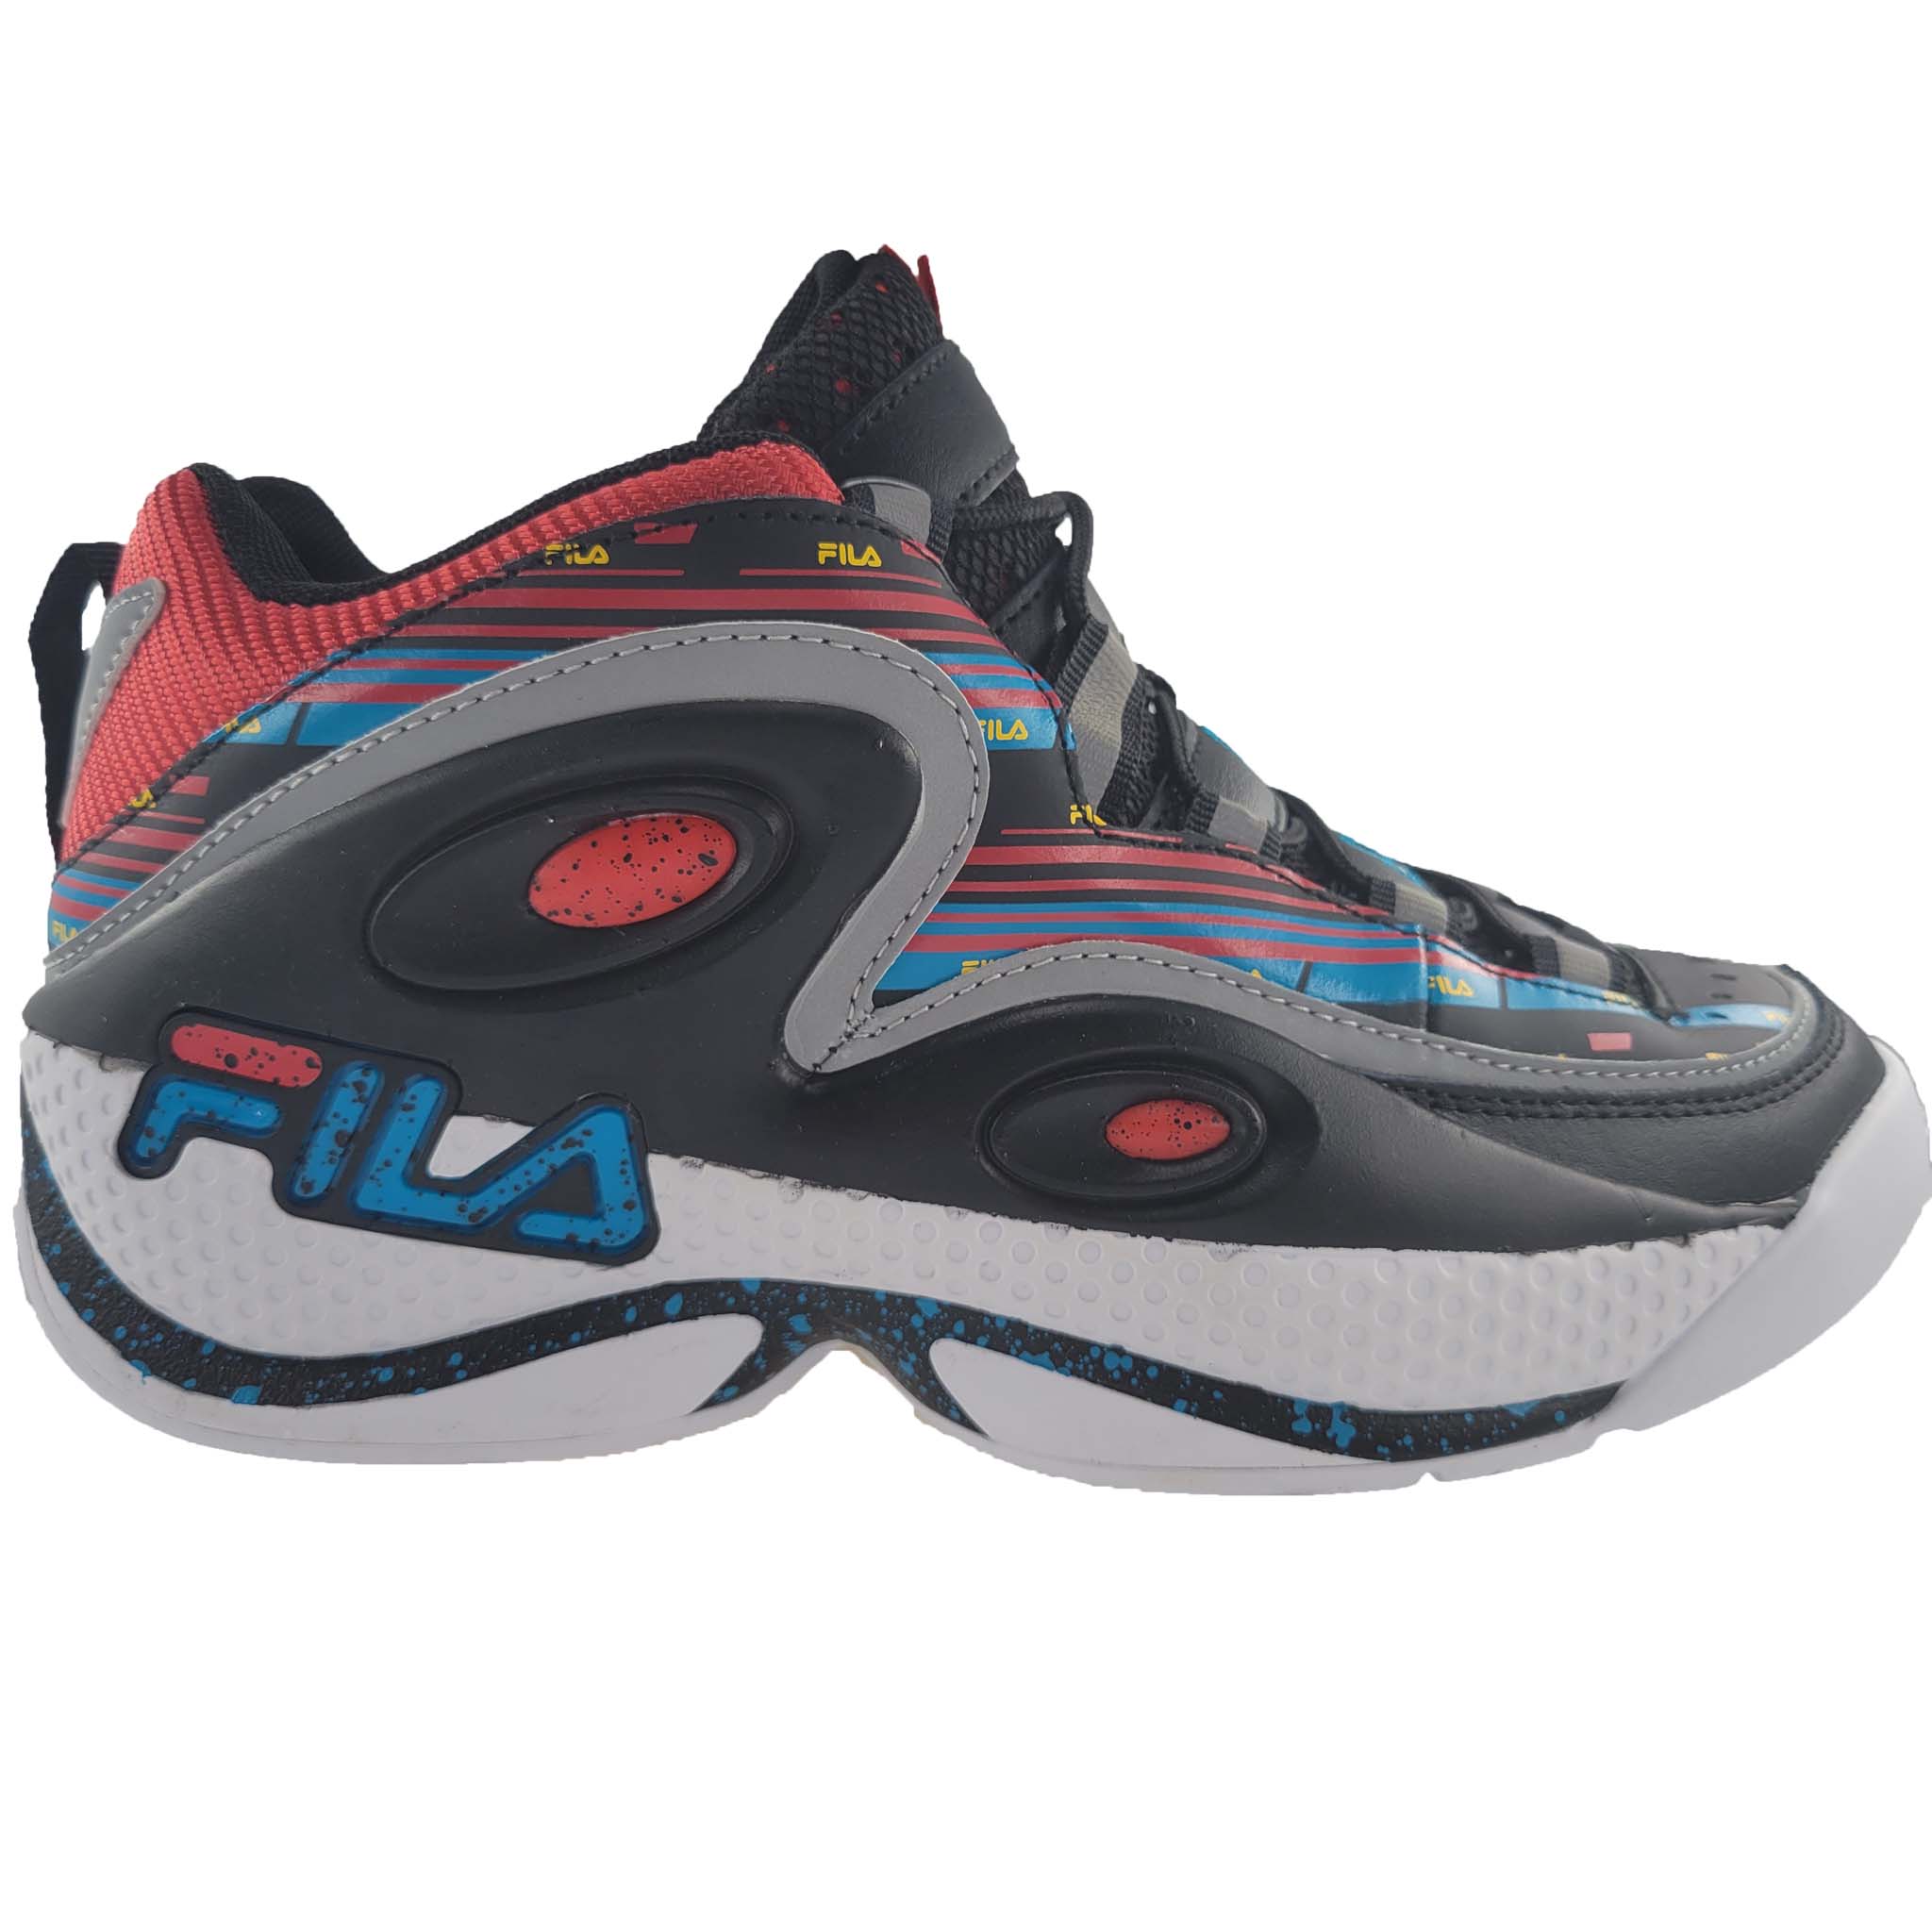 Fila Men's Athletic Basketball Shoes 1BM01289-027 – Shoe Store and More